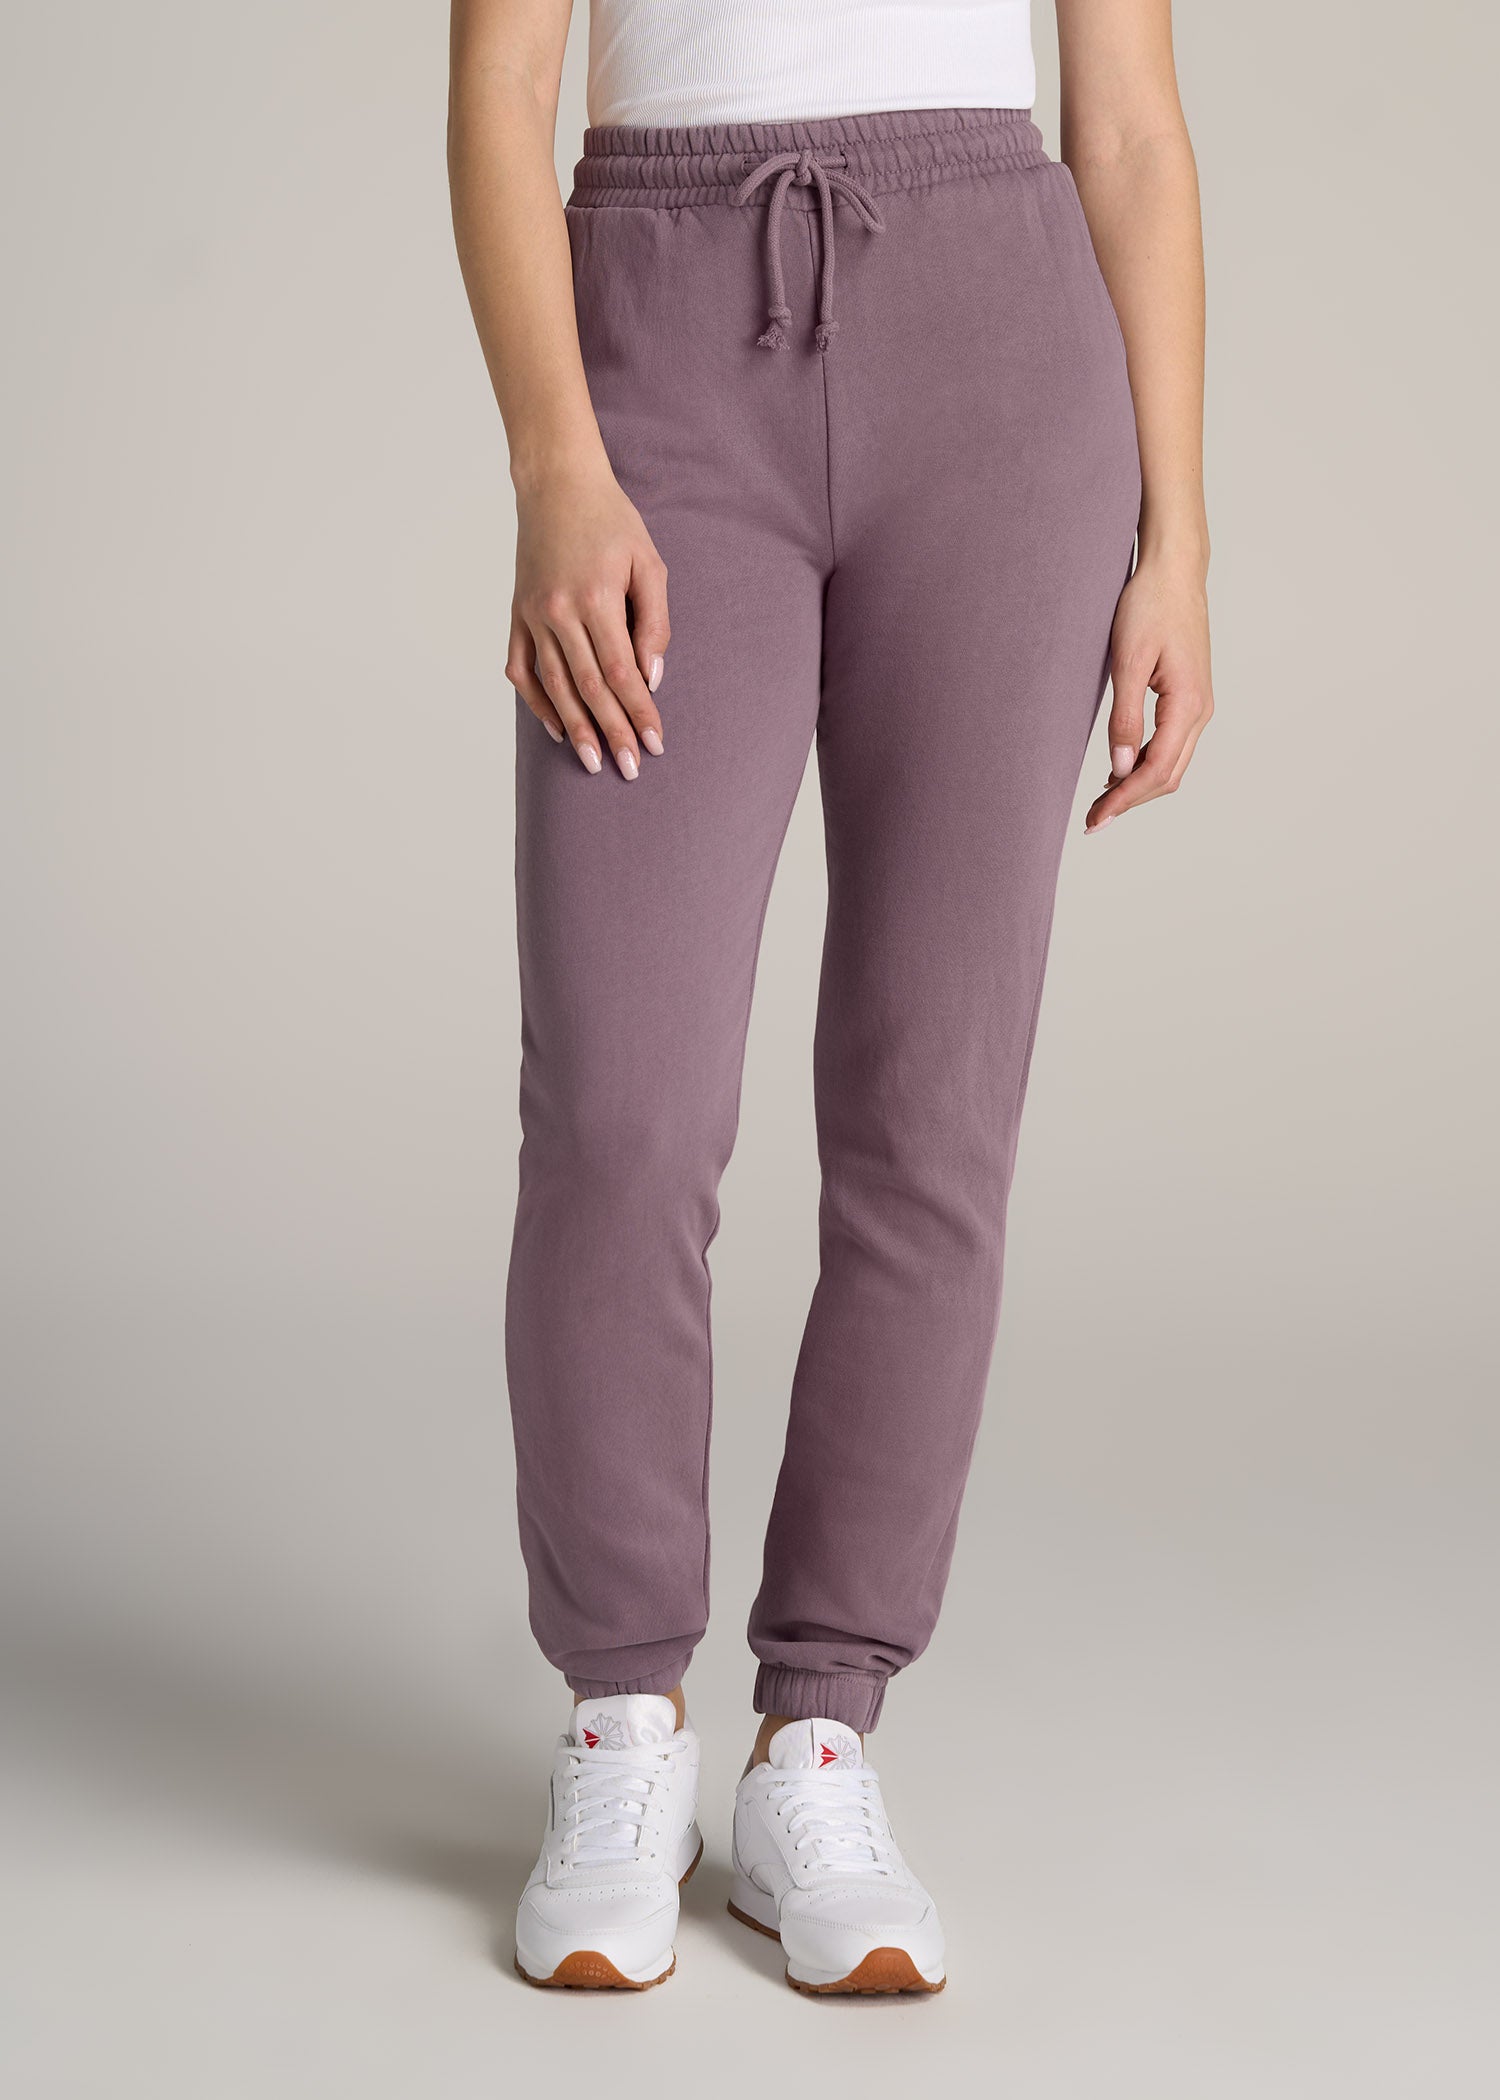 lululemon athletica The Darkness Pajama Pants for Women